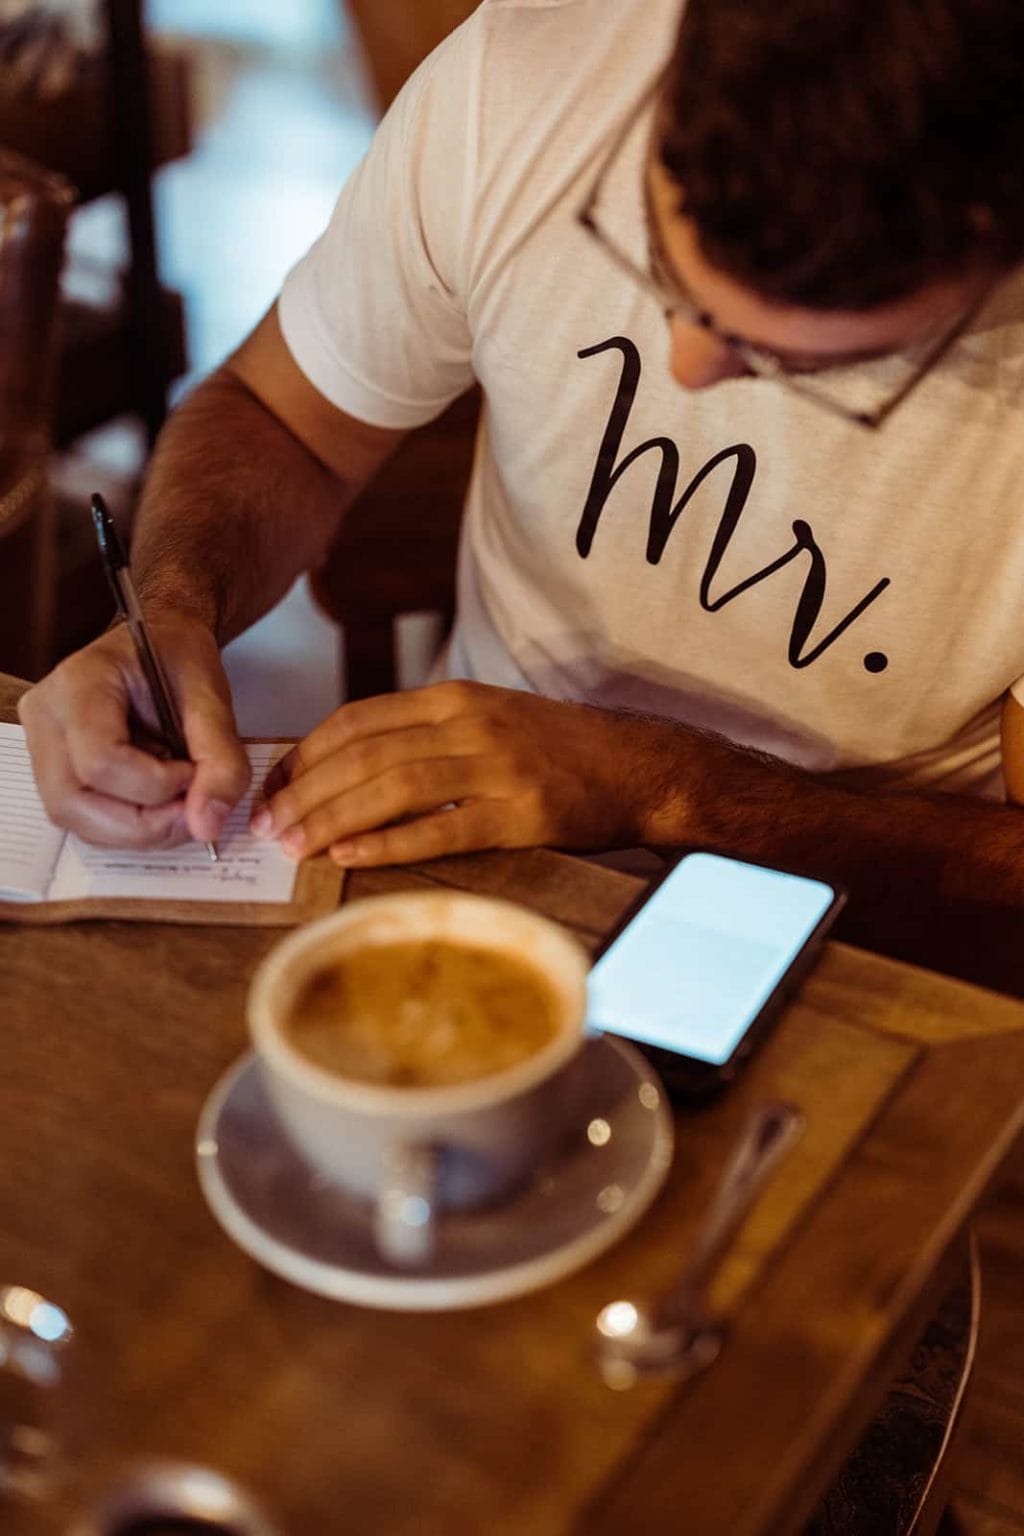 A groom writing his wedding vows while wearing a shirt that says Mr.